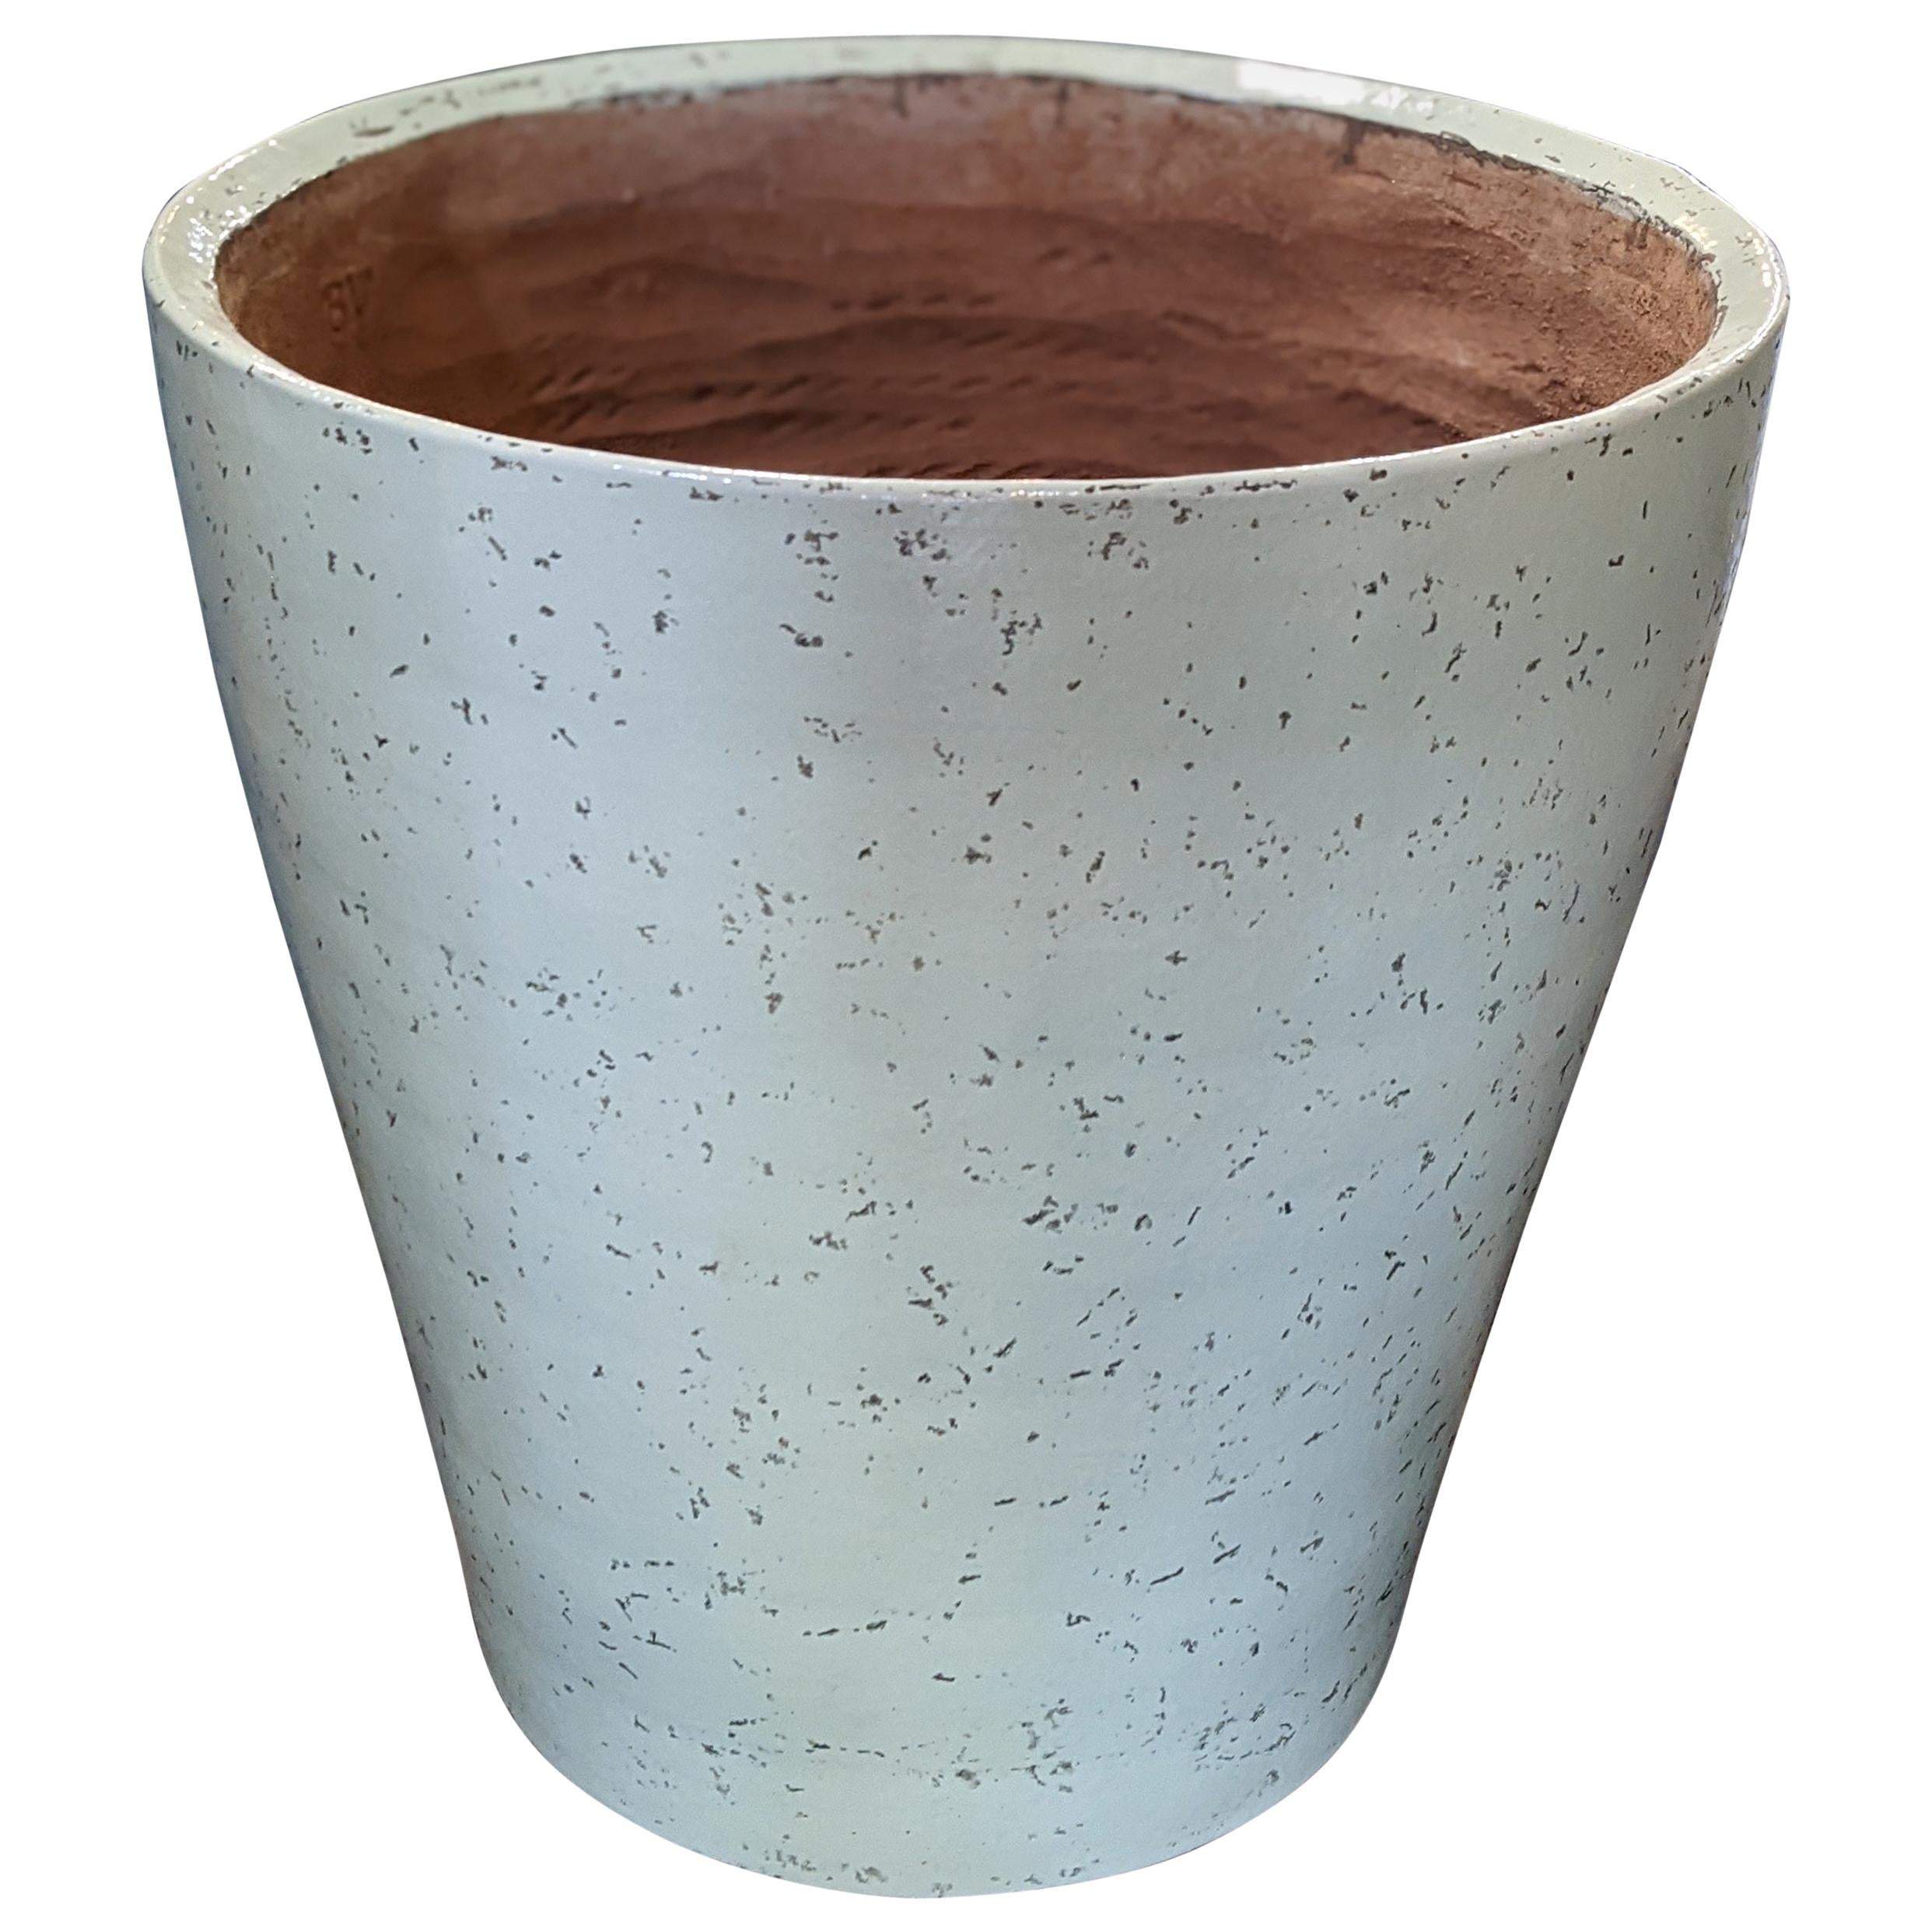 Contemporary Terracotta Planter from France